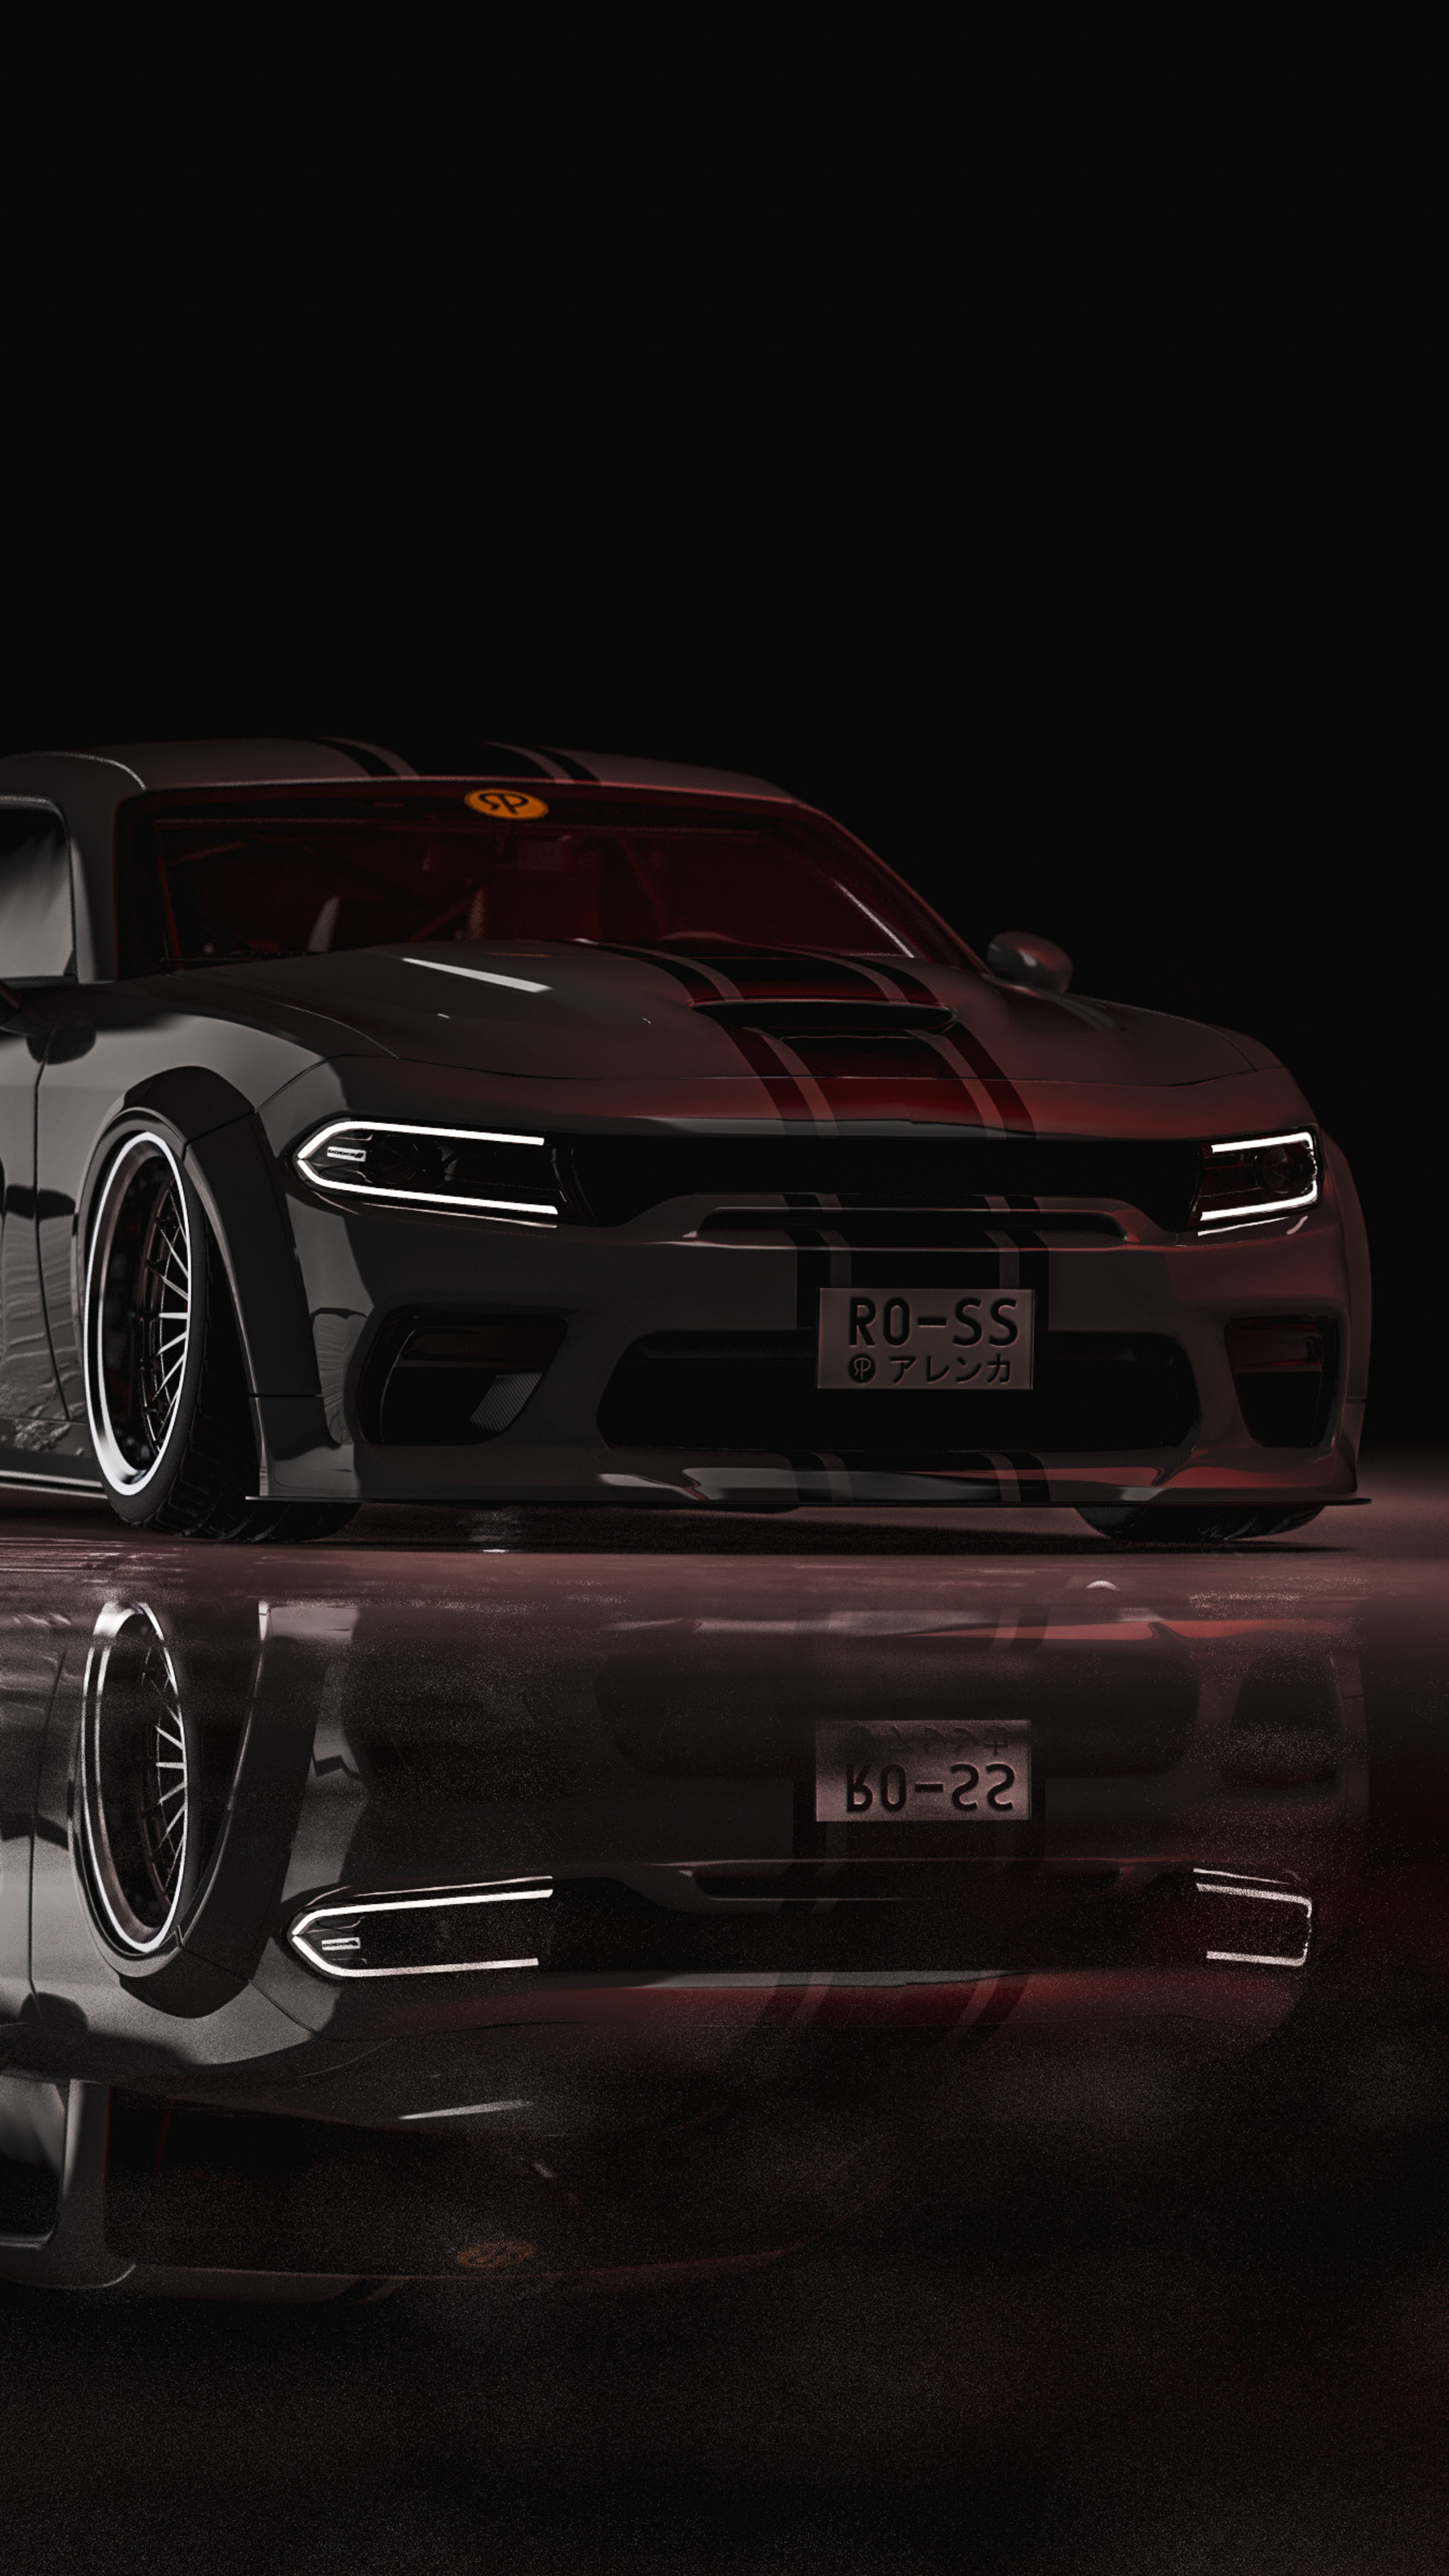 Dodge Charger, Coupe front view, High-performance, Striking design, 2160x3840 4K Handy